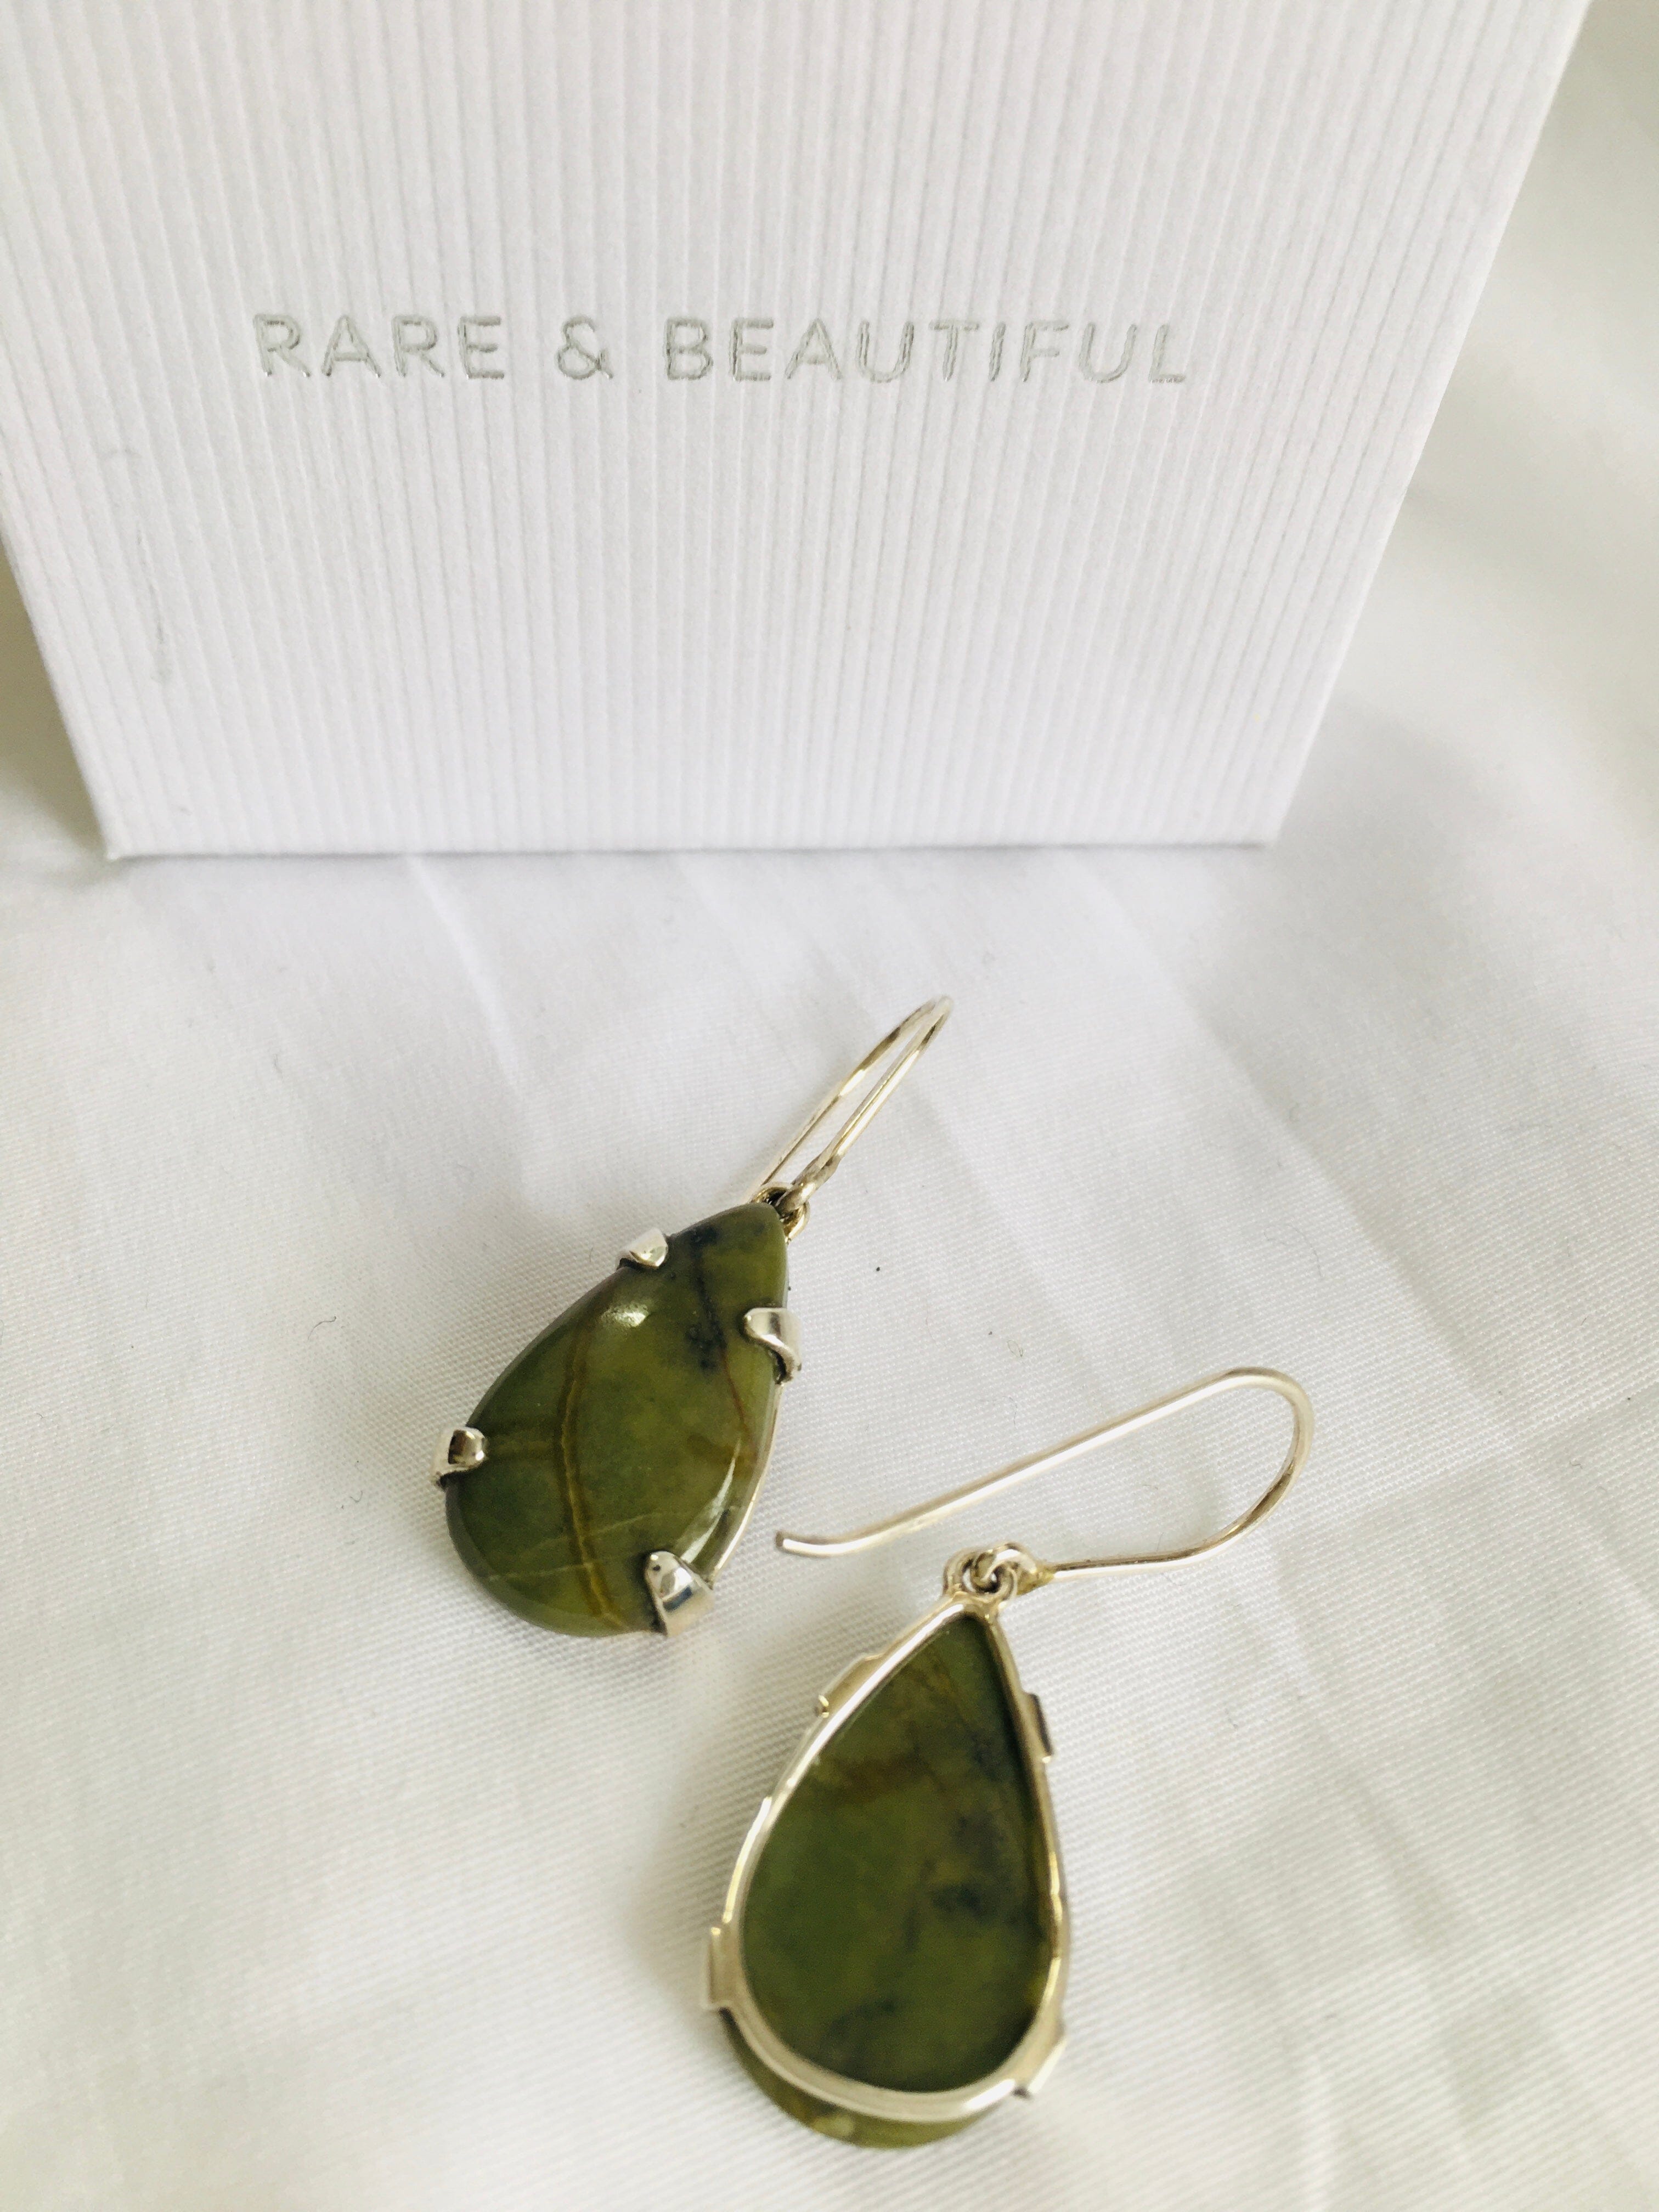 Tasmanian Jade Collection - The Rare and the Beautiful Necklaces The rare and Beautiful Teardrop Earrings (35mm) 